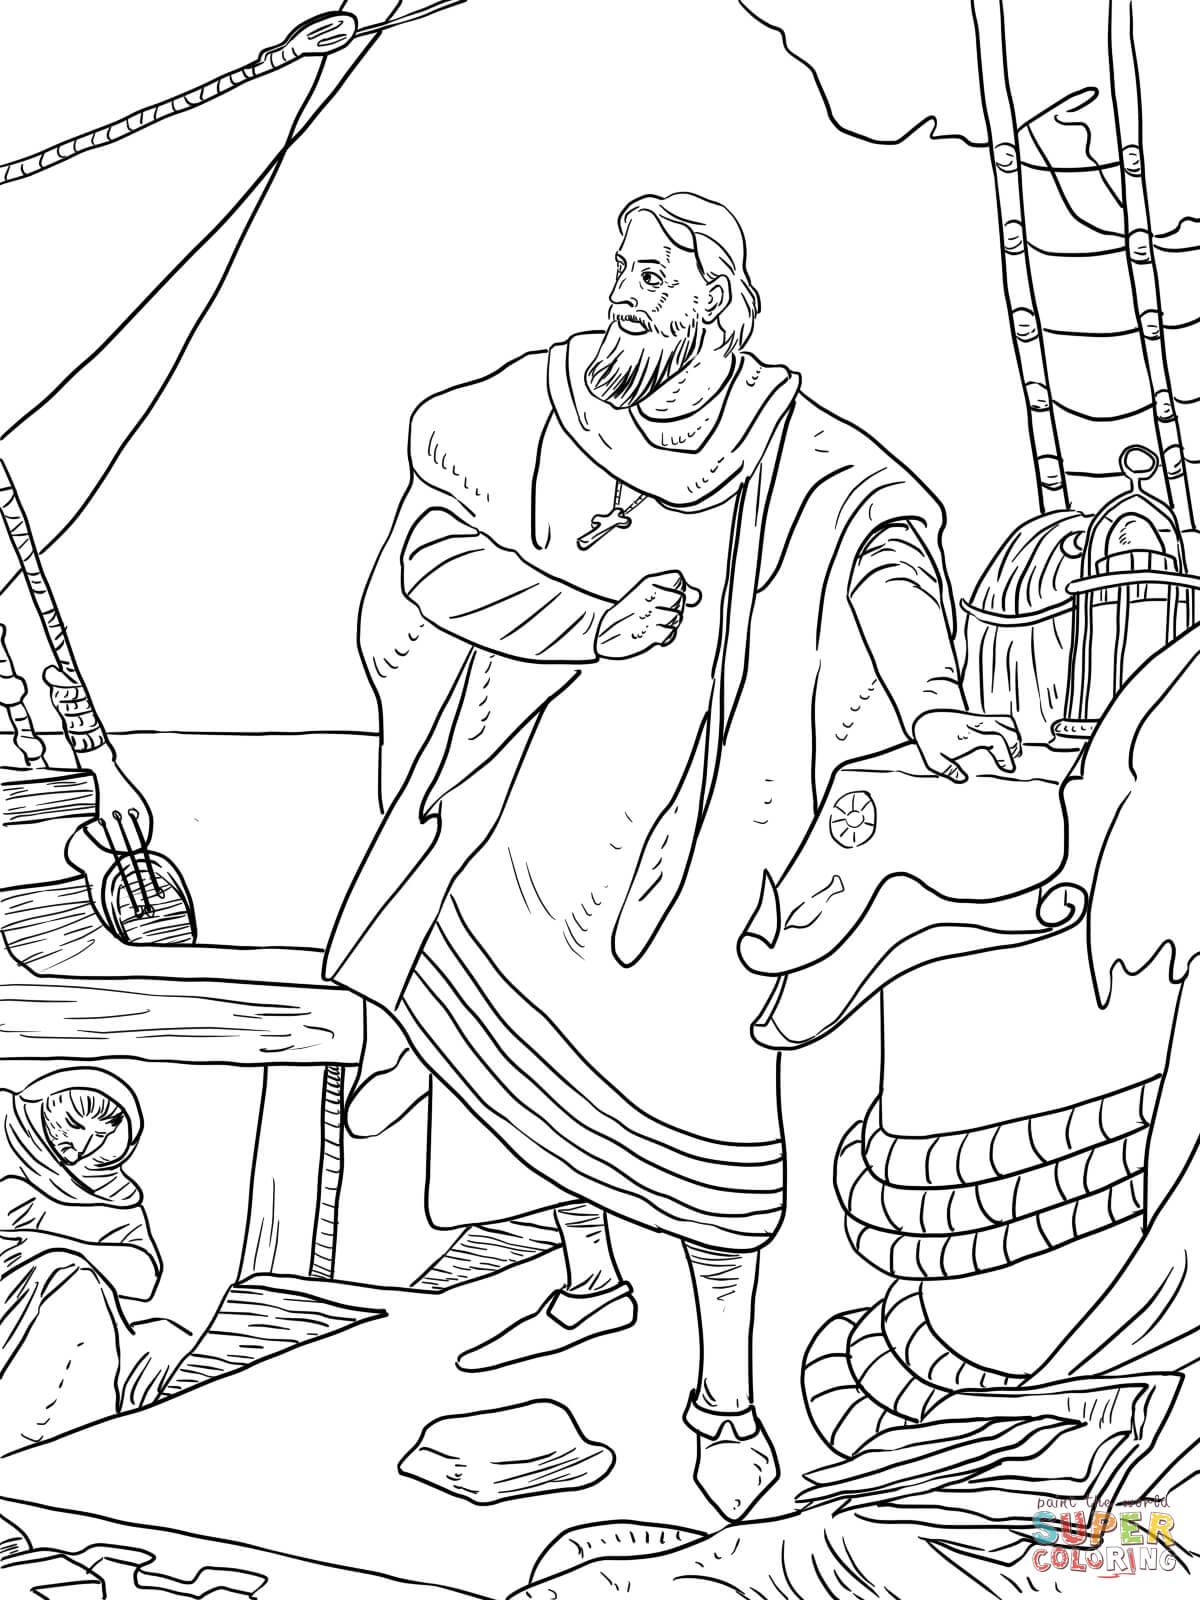 Christopher Columbus Coloring Pages Christopher Columbus Coloring Page 12 3311